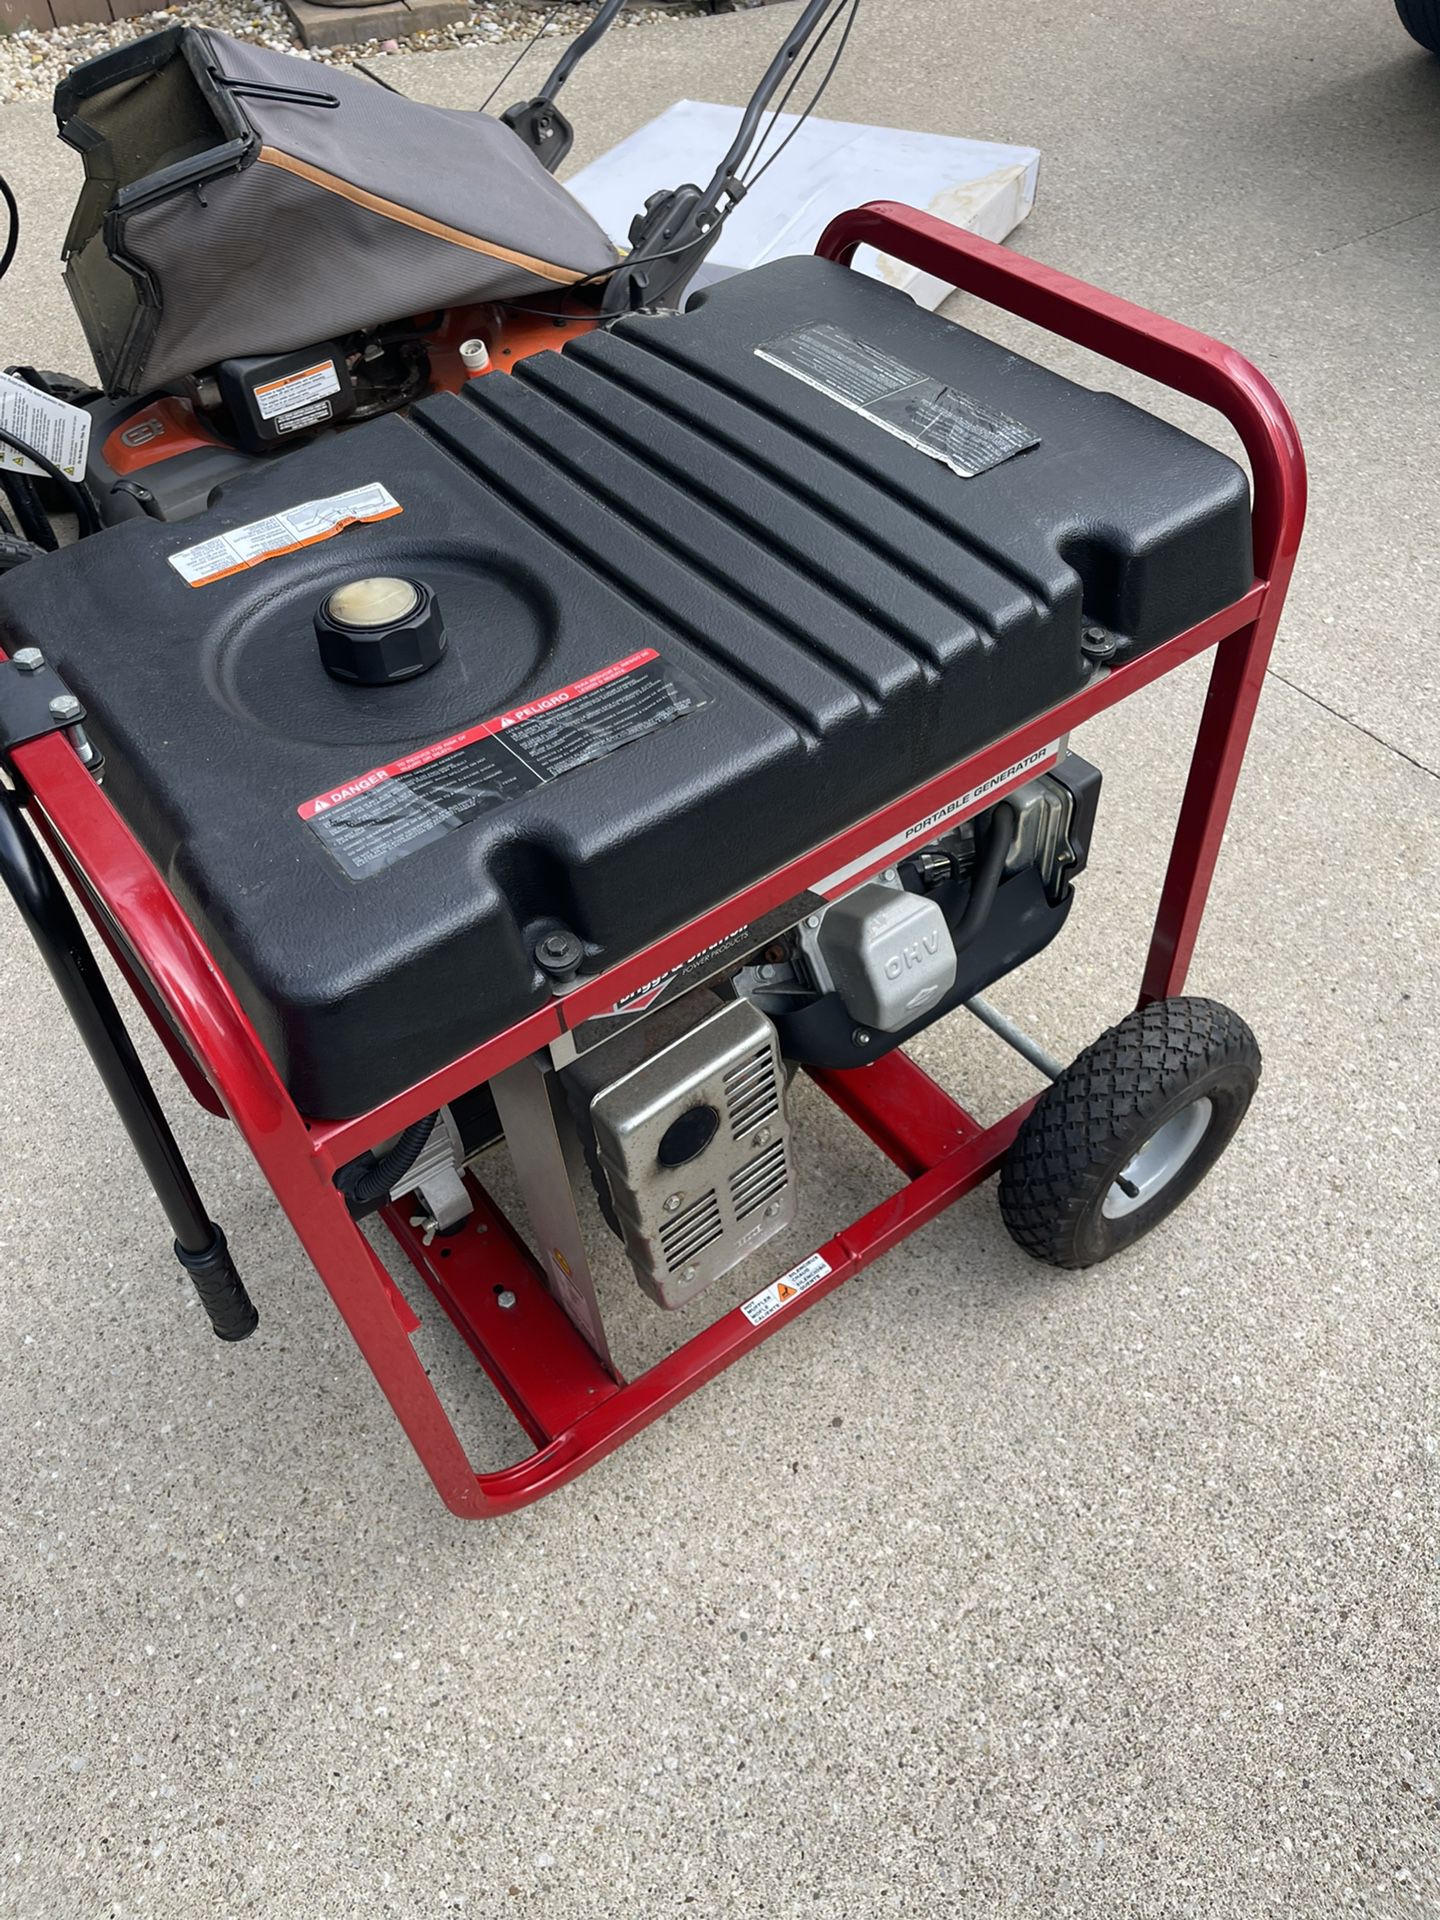 Briggs and Stratton Generator 8500 starting watts (or Trade For Mickey Mantle Cards)